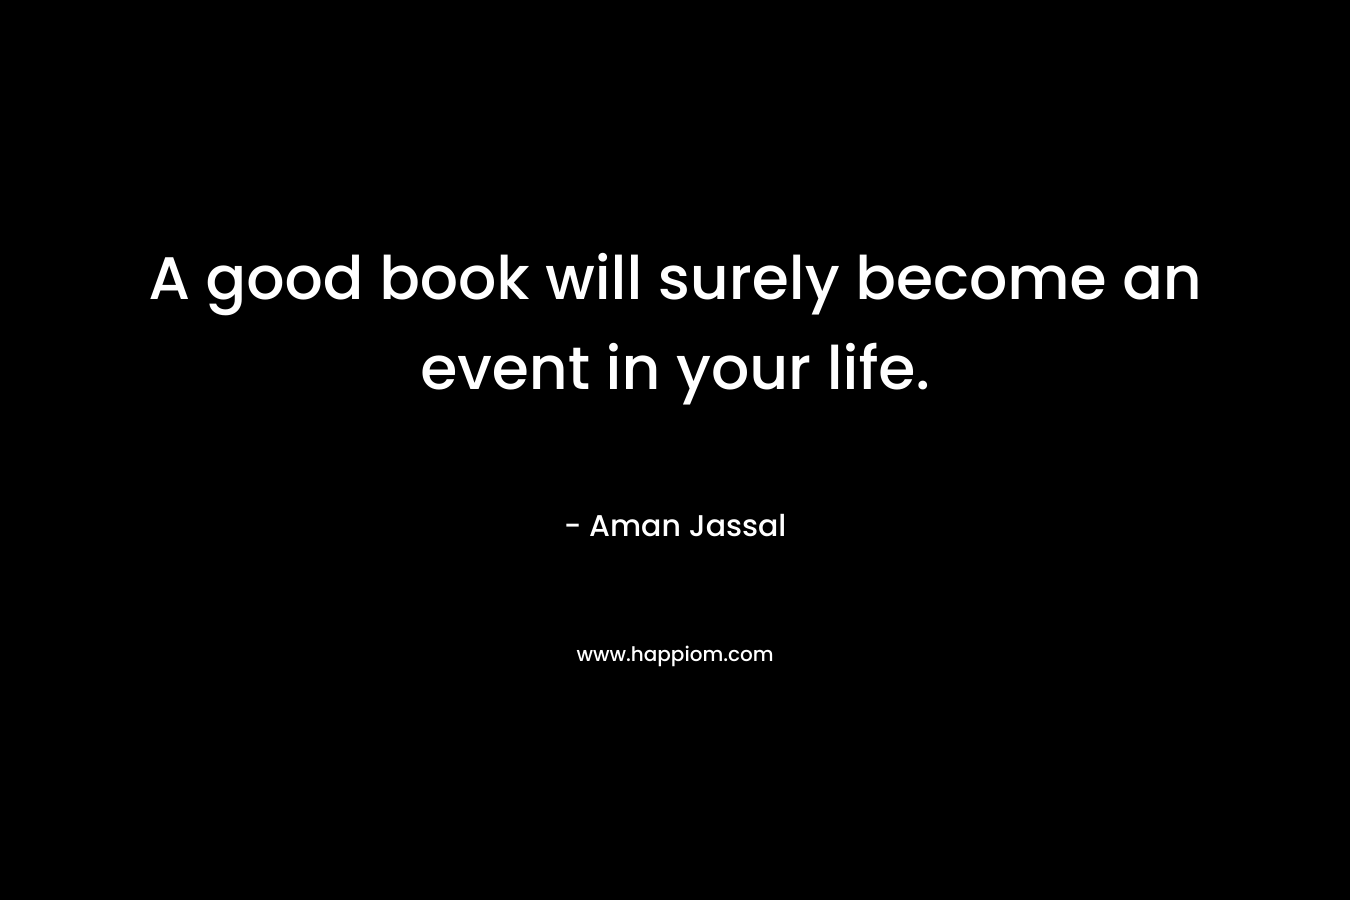 A good book will surely become an event in your life.